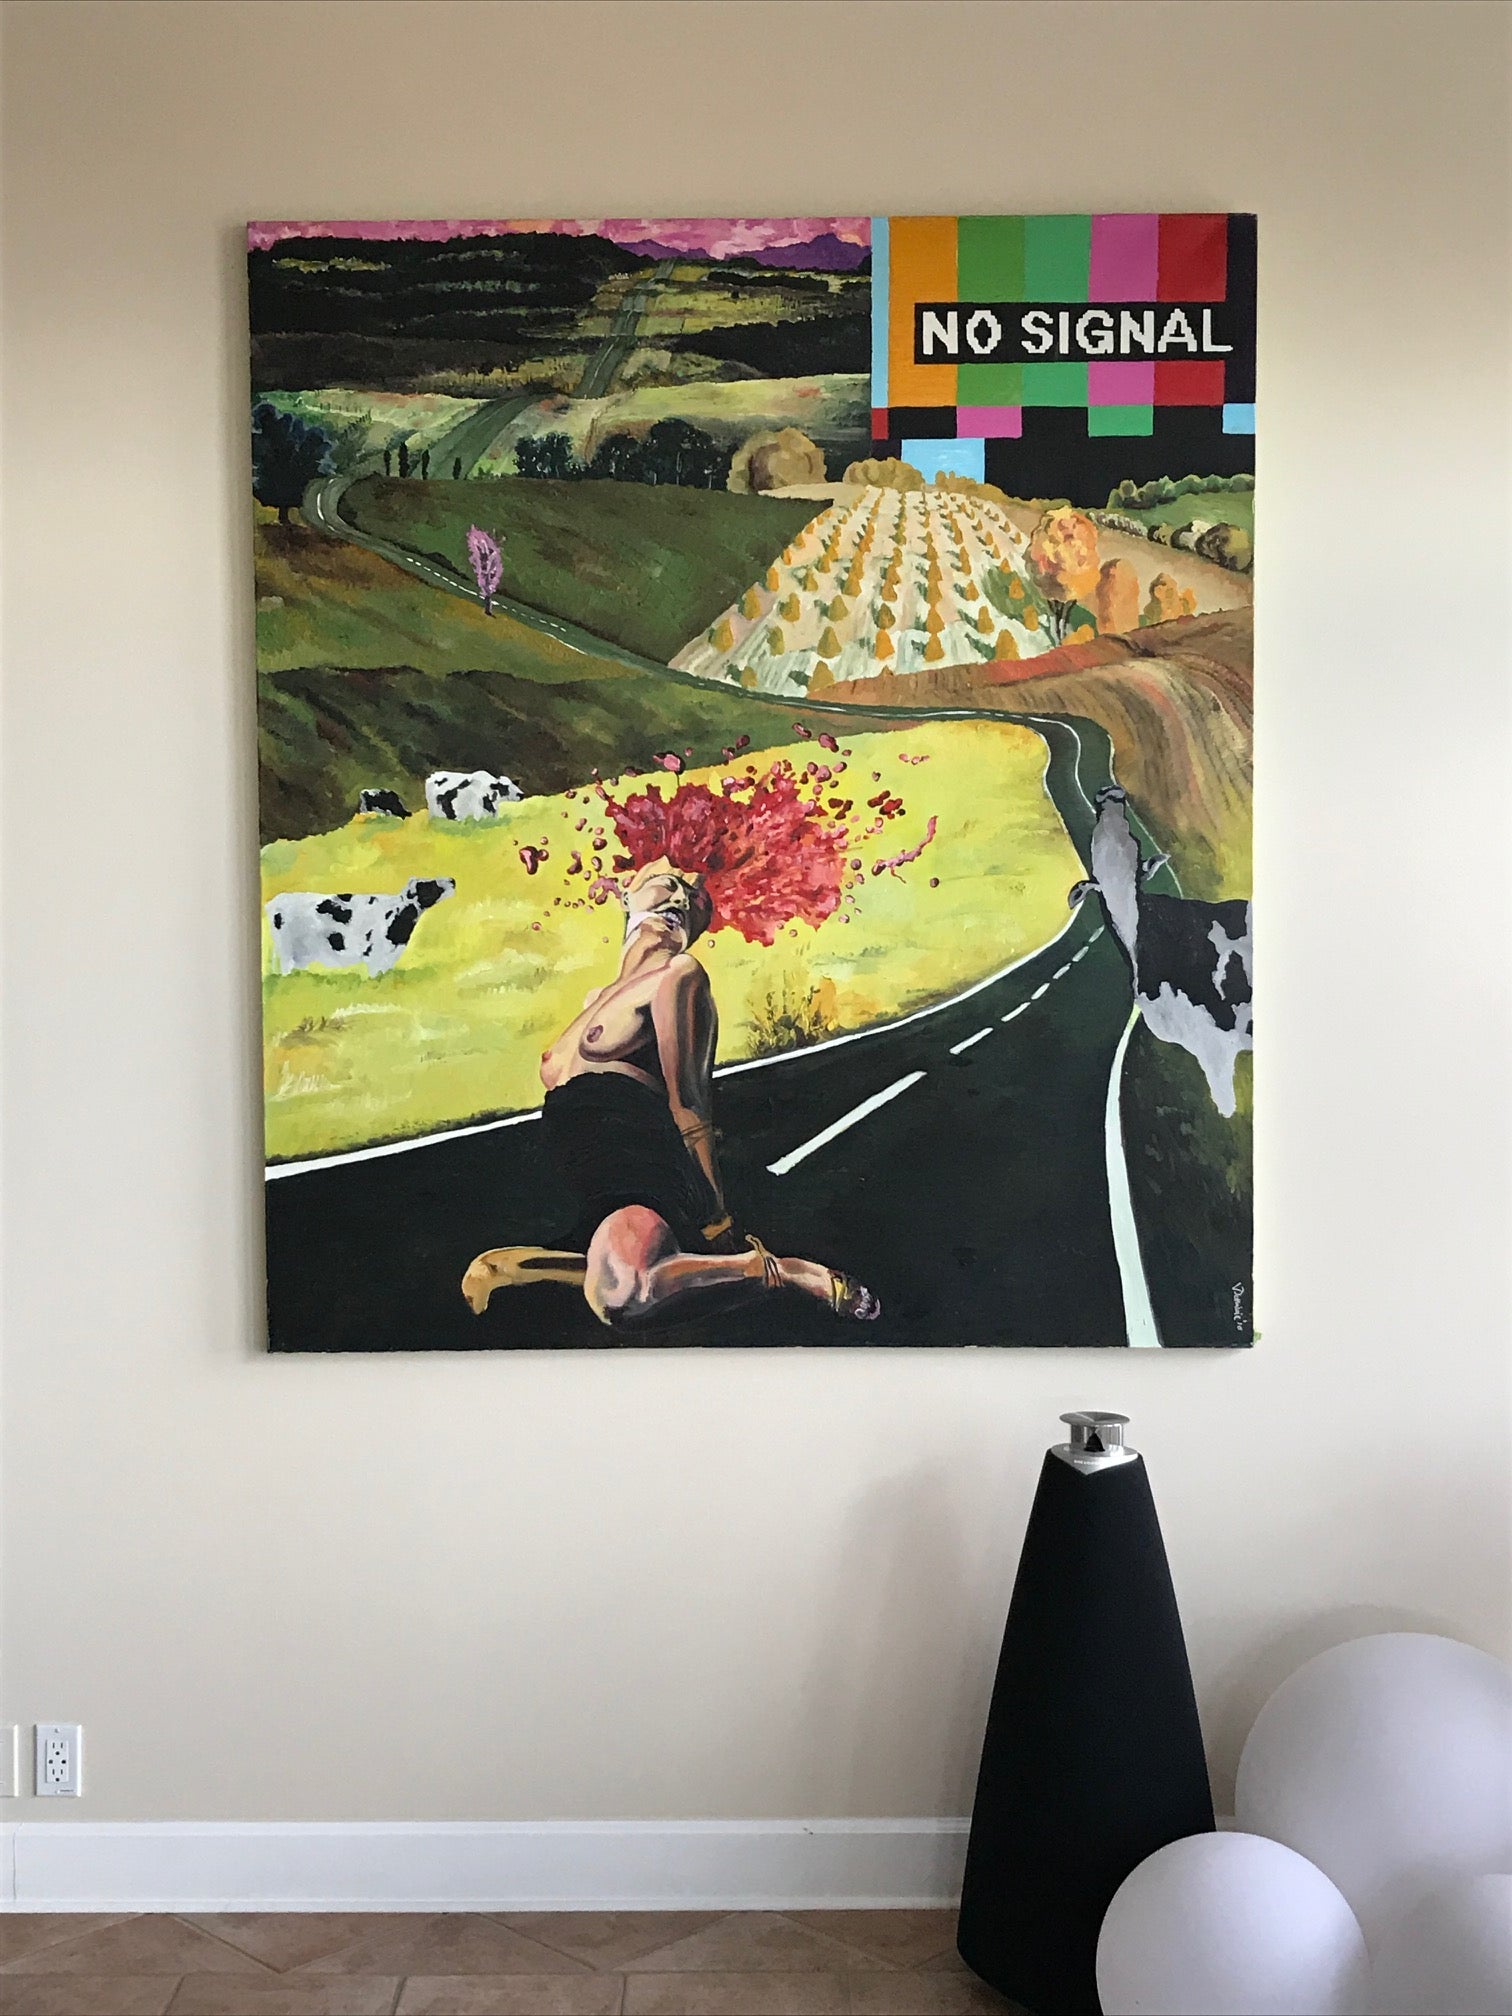 No signal (Roadkill) - original oil painting on canvas in the home of the collector in Arizona, US.